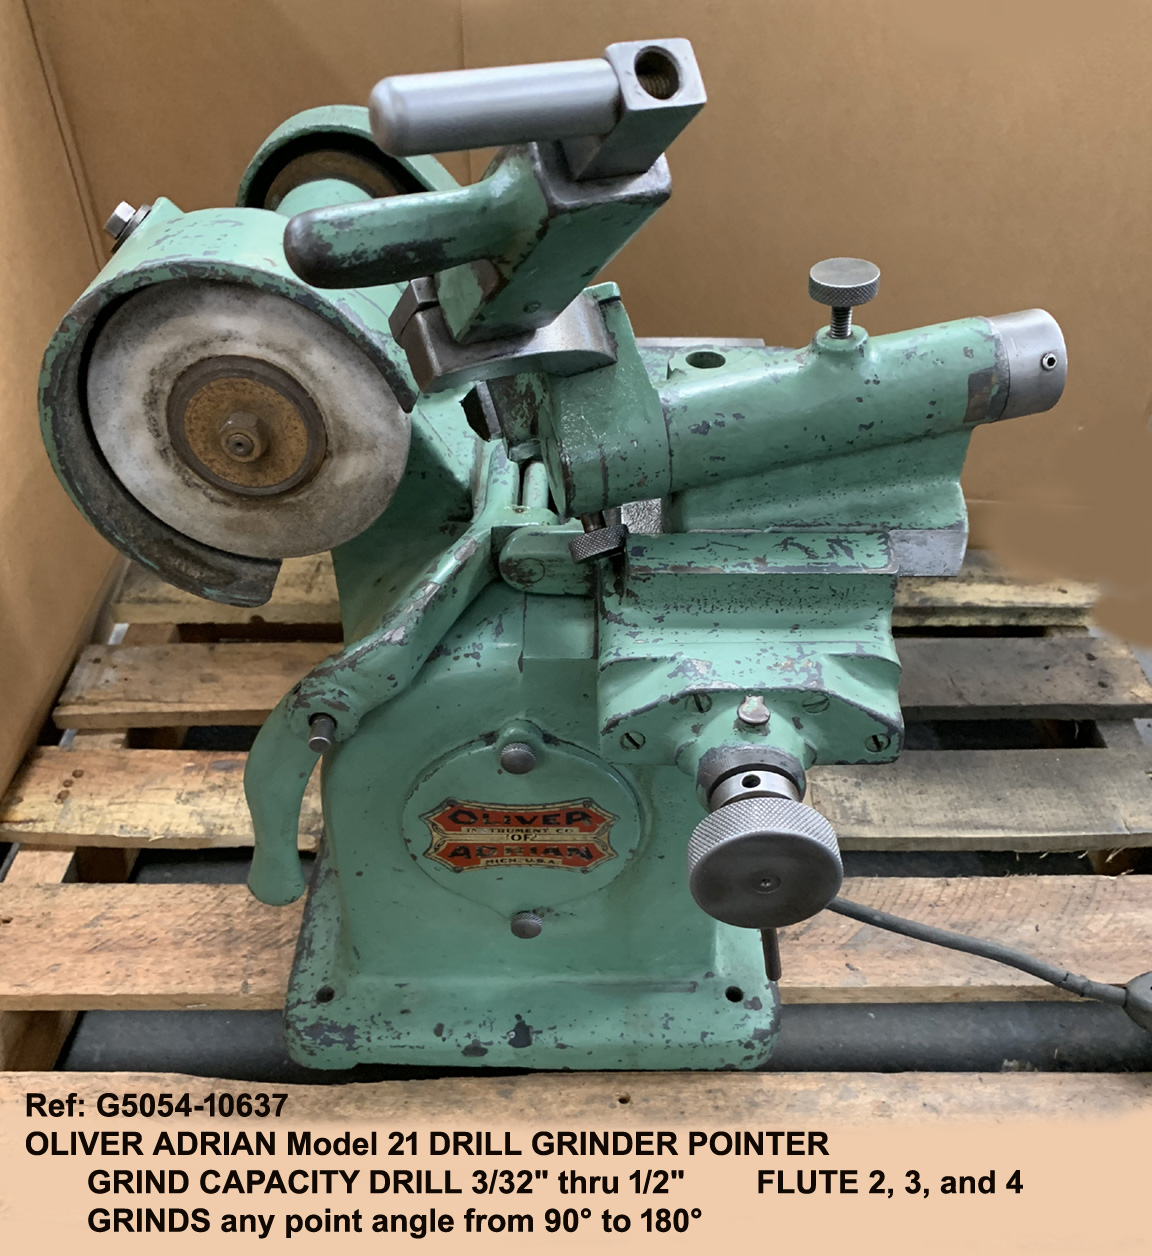 Oliver Adrian Model 21 Drill Grinder Pointer Grinding capacity drill 3/32" thru 1/2" - Flute 2 3 and 4 and Grinds any point angle from 90° to 180°, Serial Number H-1953, Inventory Reference G5054-10637-1 Front view